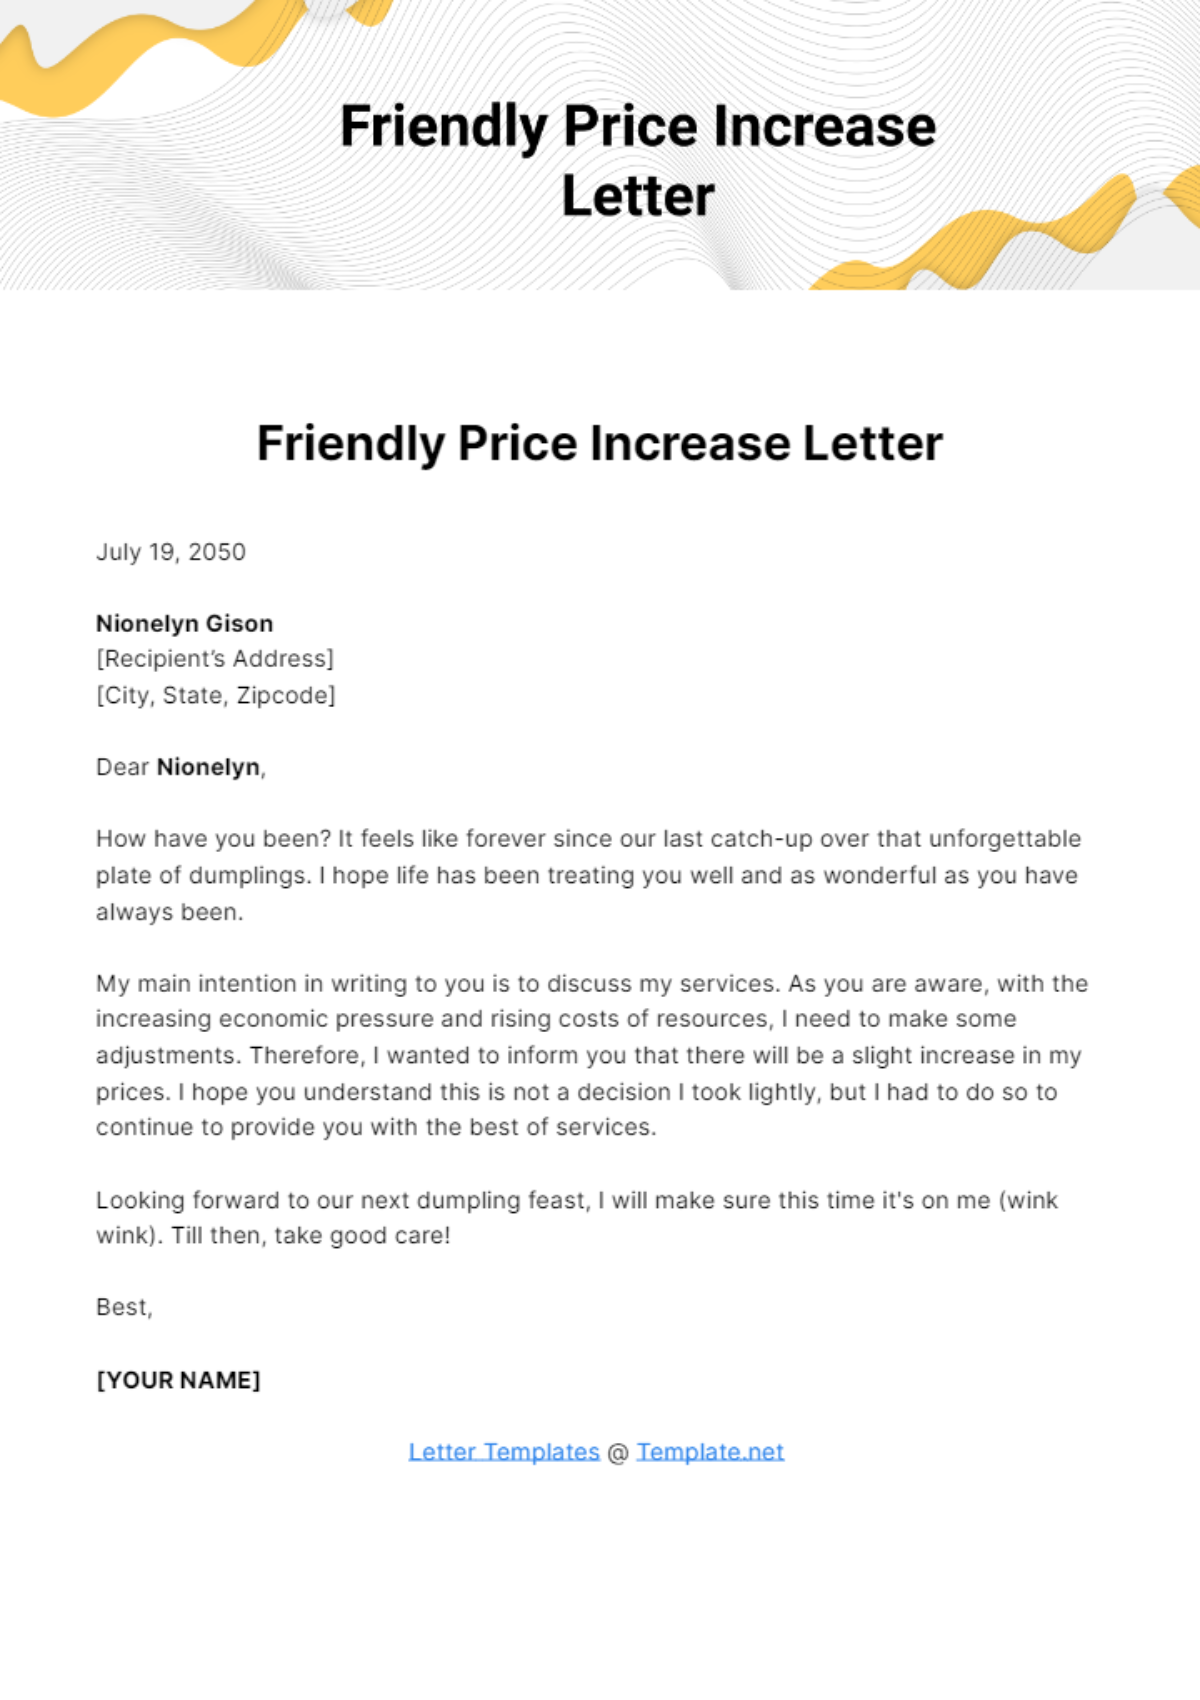 Friendly Price Increase Letter Template